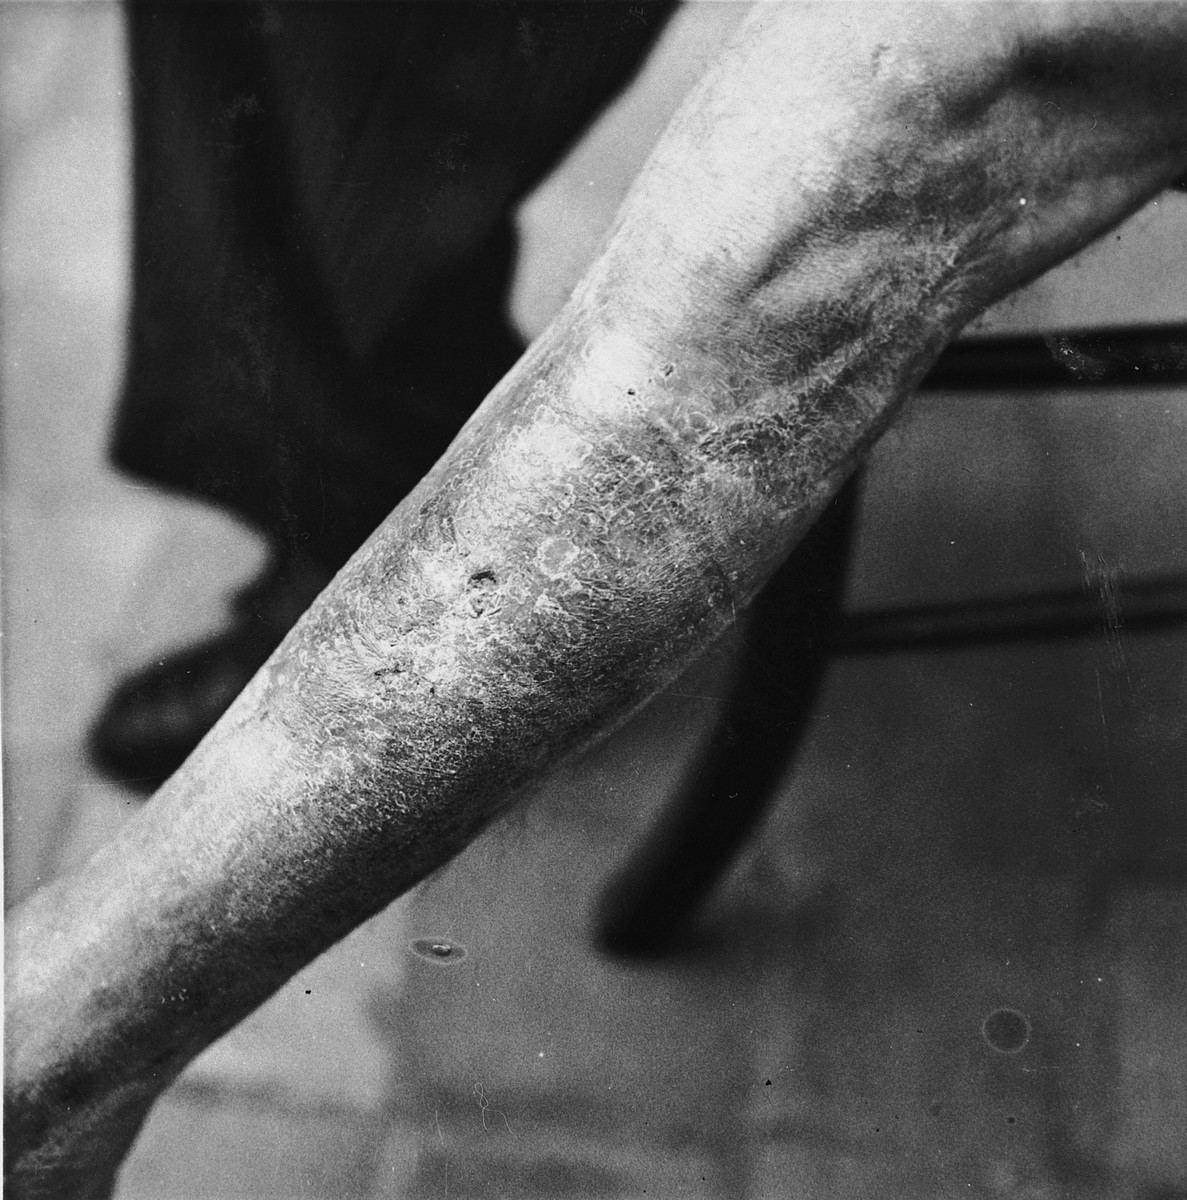 Emile Scieur shows the scarring on his leg that resulted from being beaten with a rubber truncheon in the Breendonck internment camp.